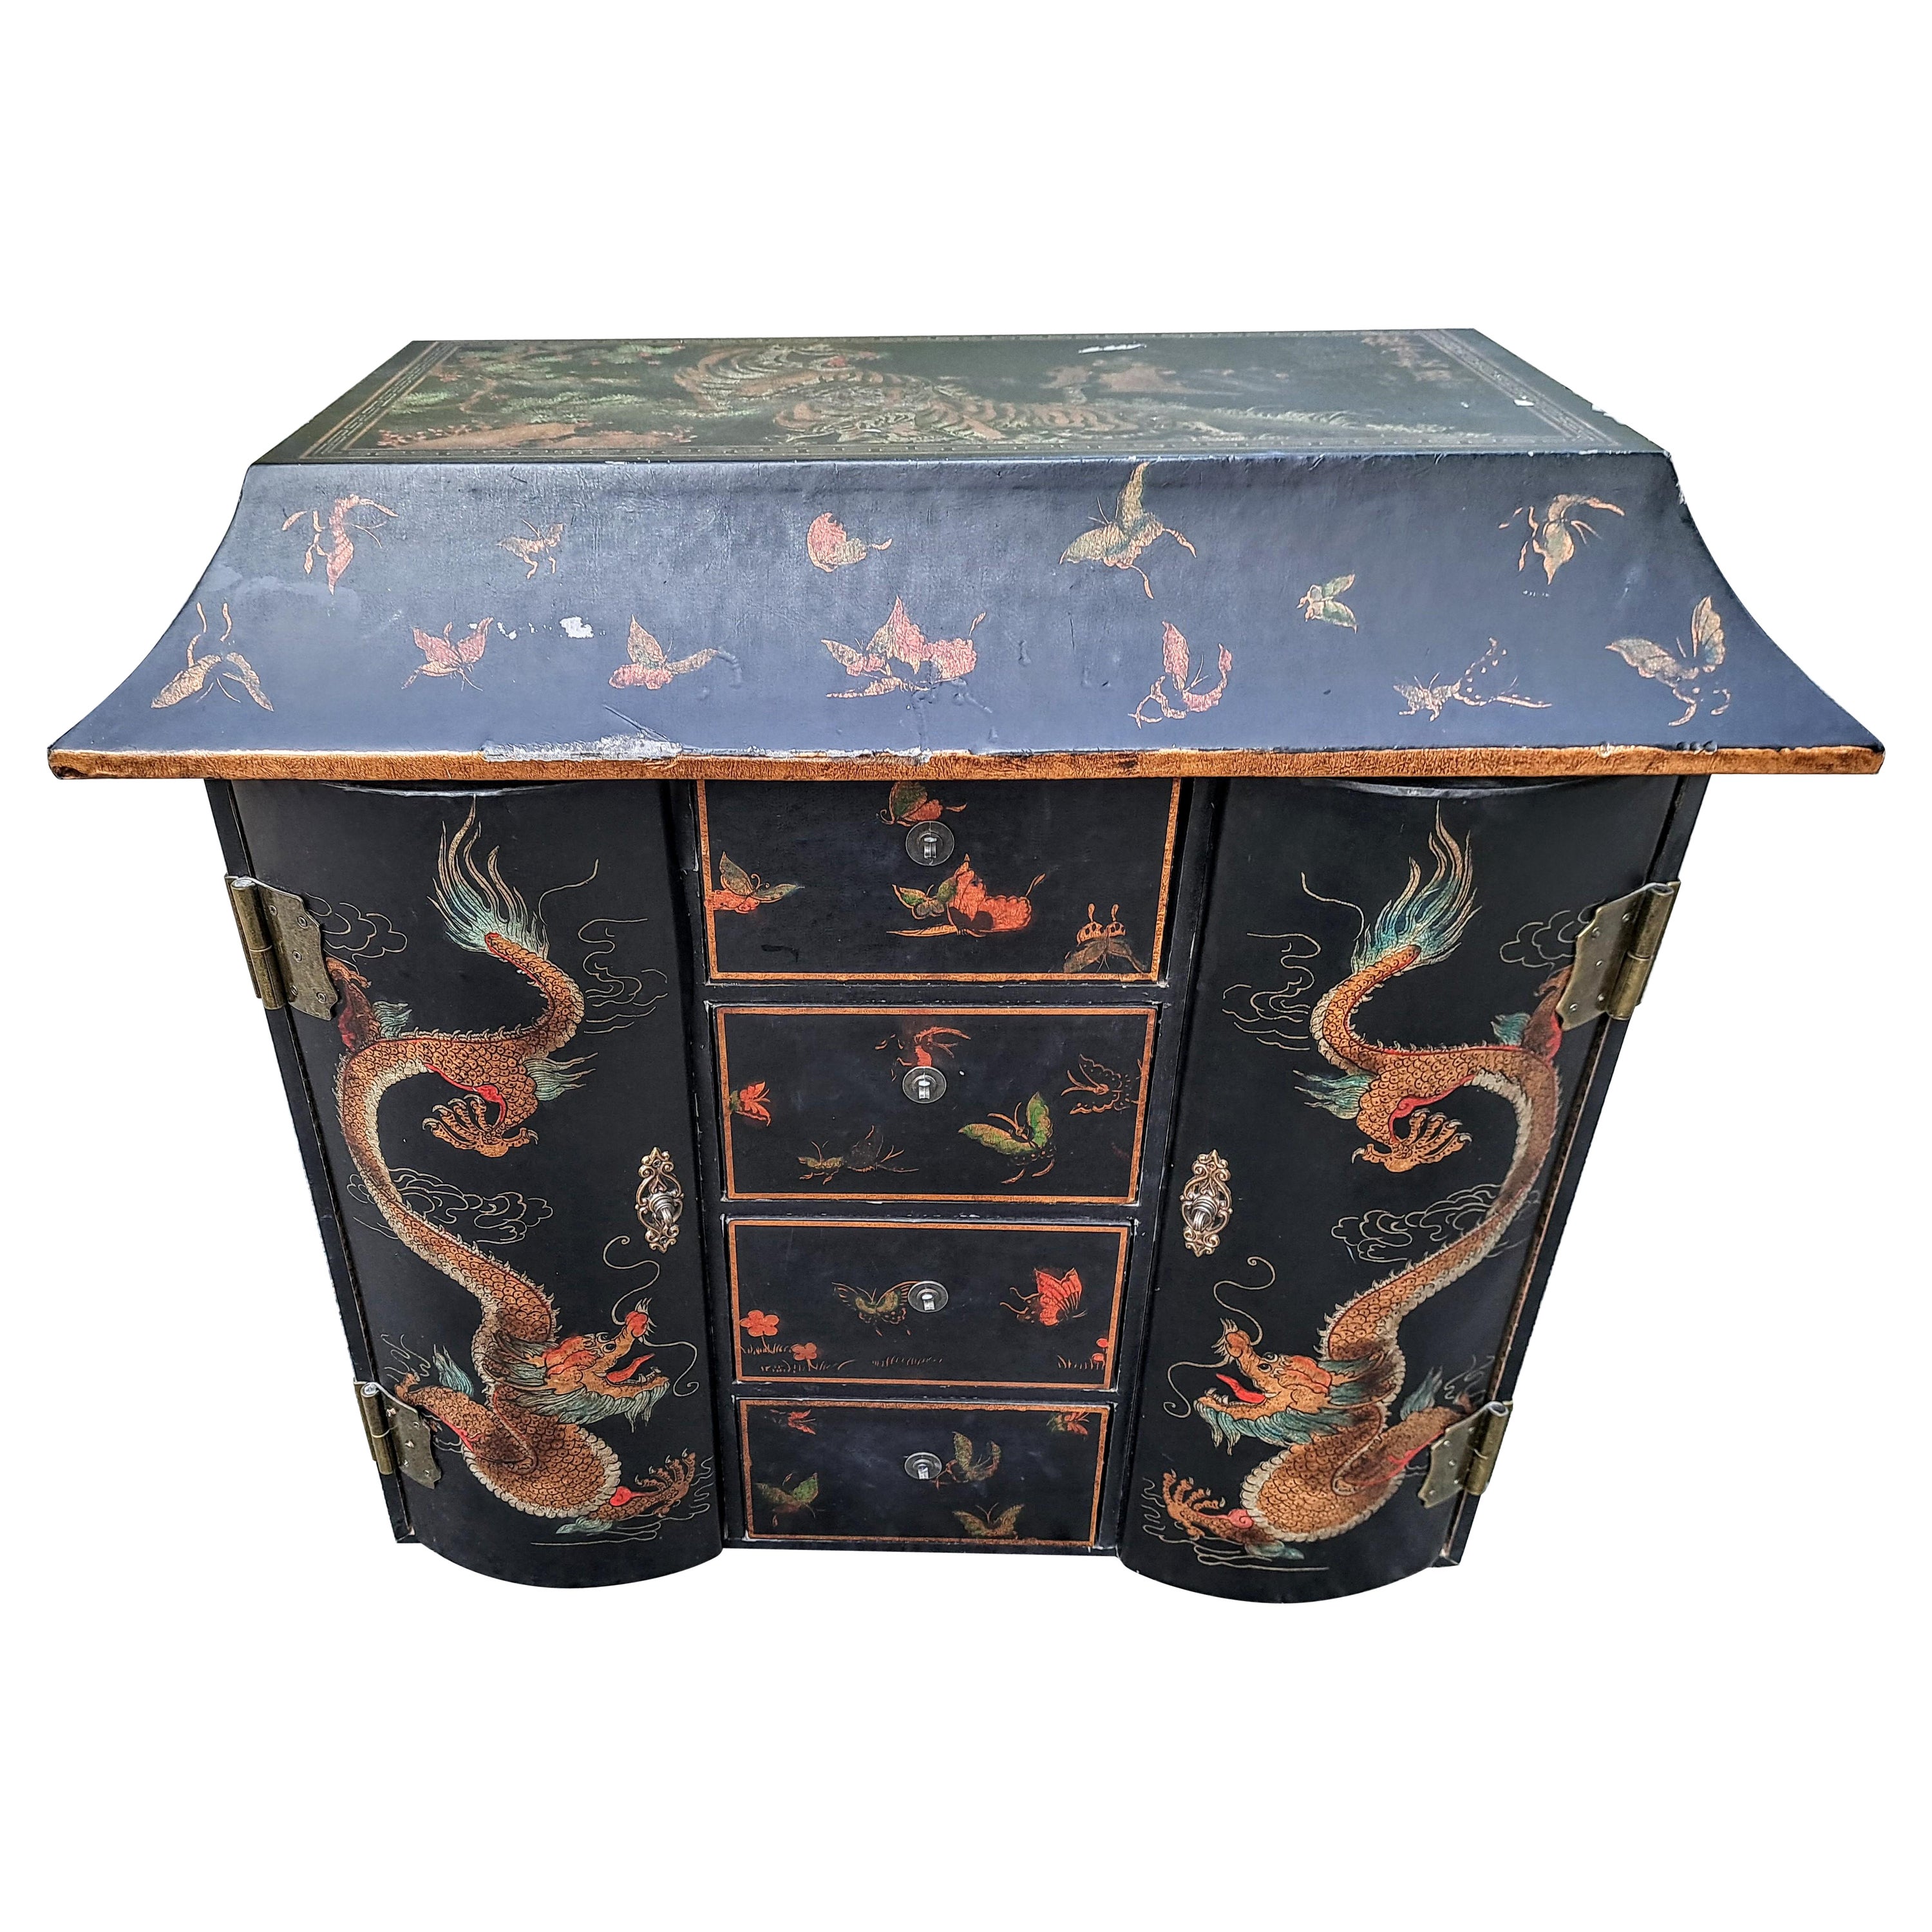 Antique Asian Chinoiserie  Pagoda Shaped Tea / Apothecary Cabinet 